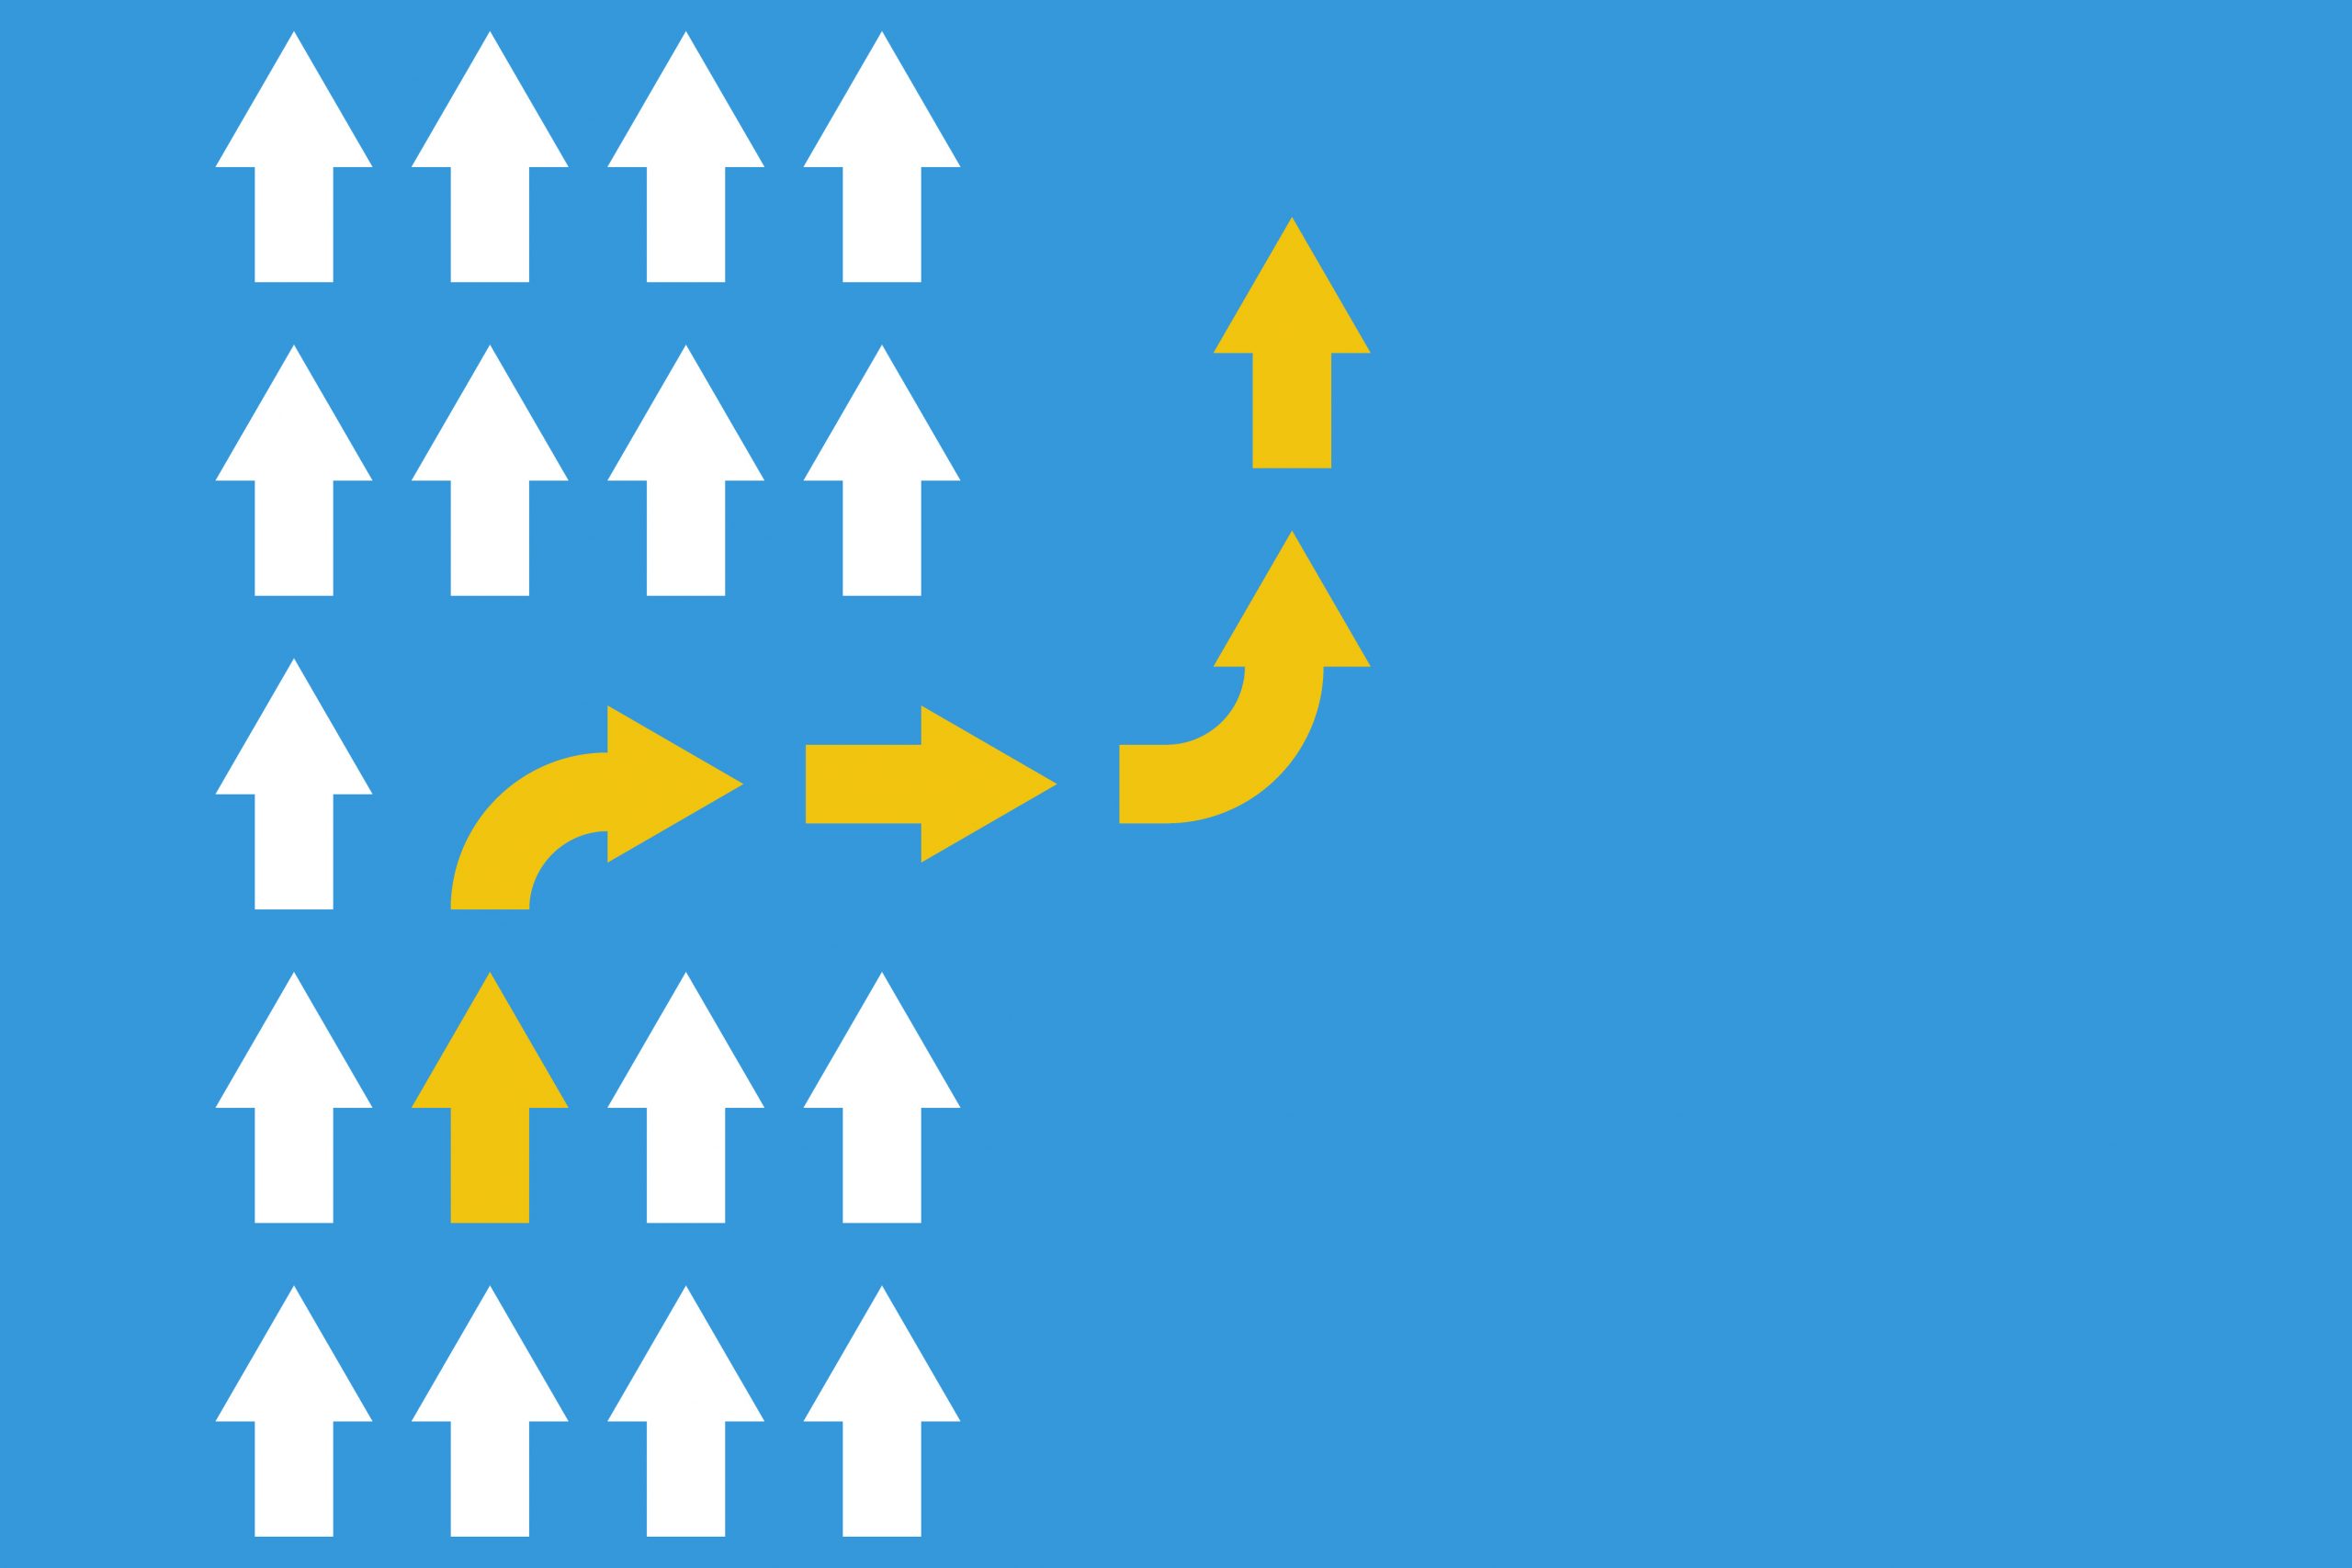 White arrows point in the same direction while yellow arrows show a different path, representing a mindset of change.